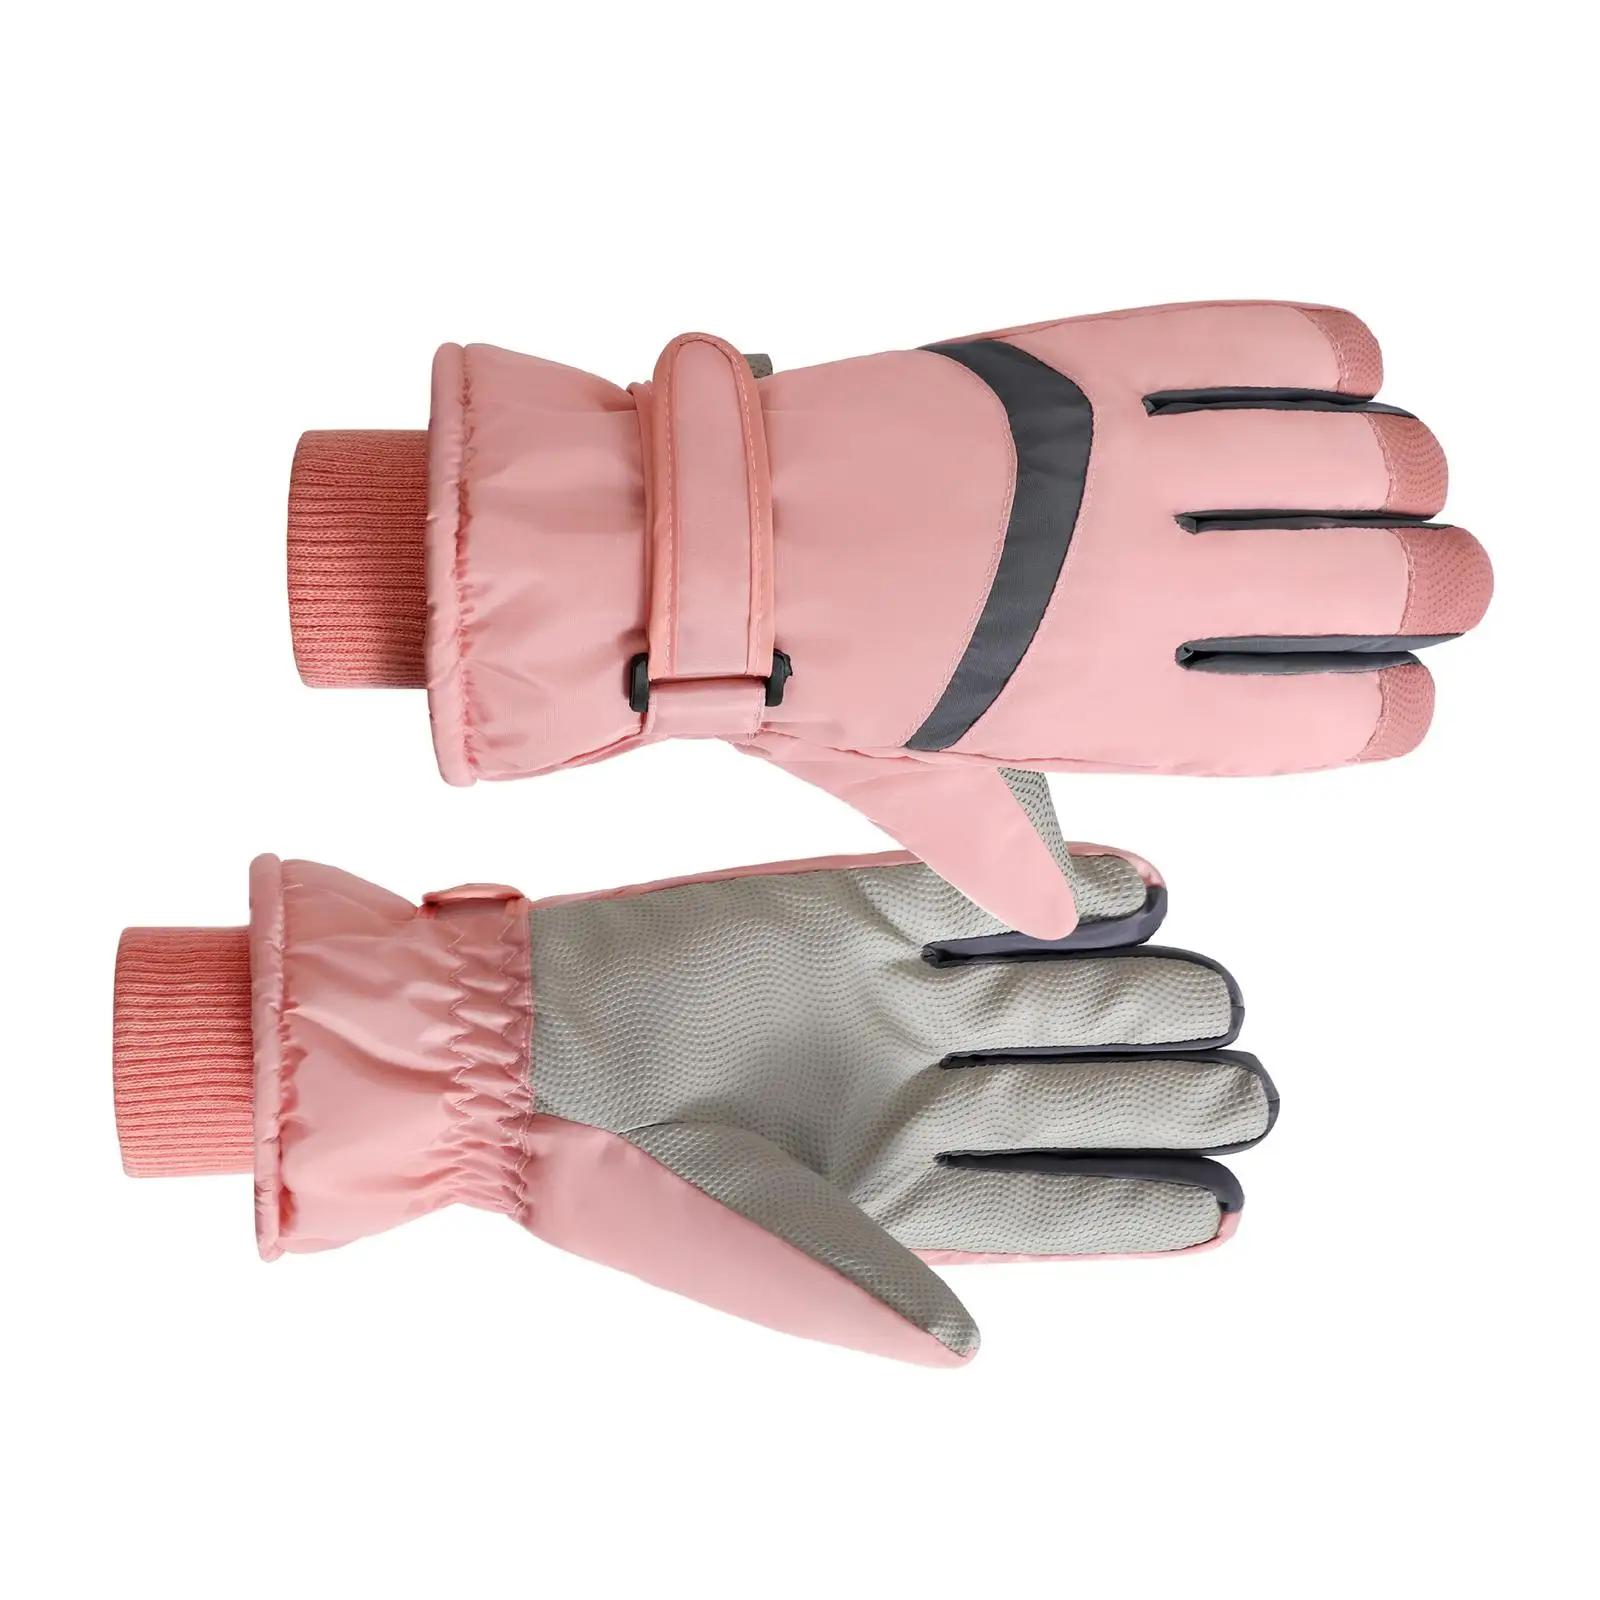 Winter Snowboard Gloves for Cold Weather Touch Screen Ski Gloves for Running